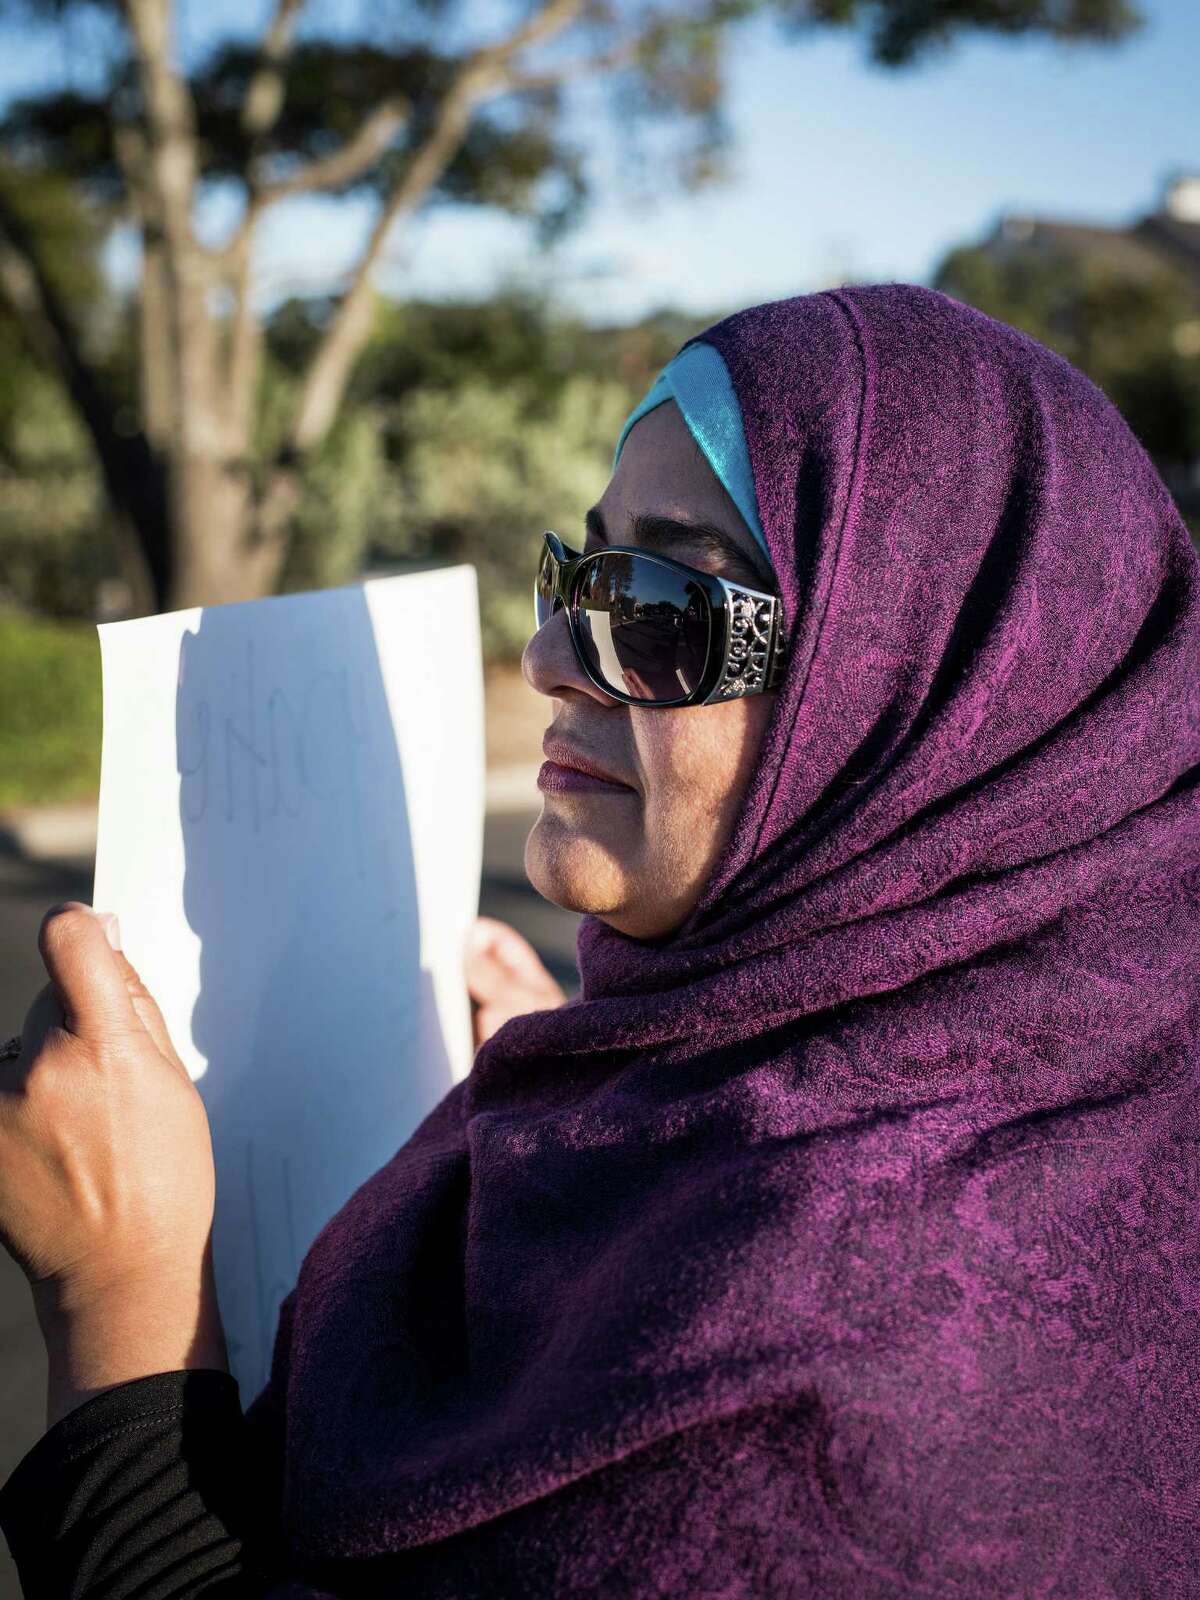 Sarah Samreen, a physician in San Antonio, protests Israel's occupation of Palestinian lands outside of Cornerstone Church during their 35th annual "A Night to Honor Israel," in San Antonio, Texas on Saturday, October 29, 2016.